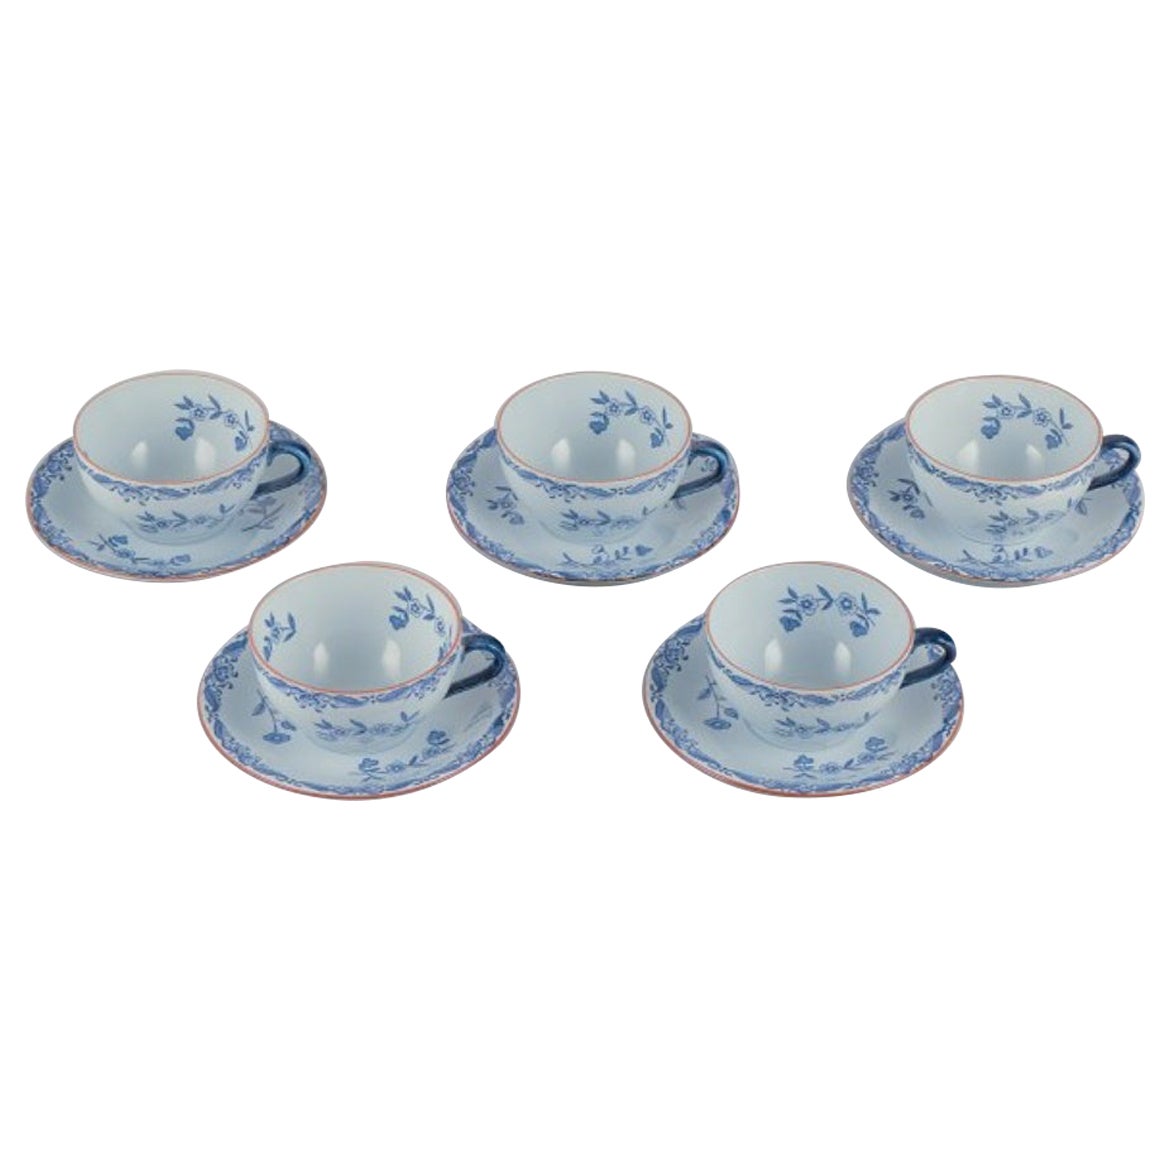 Rörstrand, Sweden. Set of five "Ostindia" coffee cups and saucers in faience. 